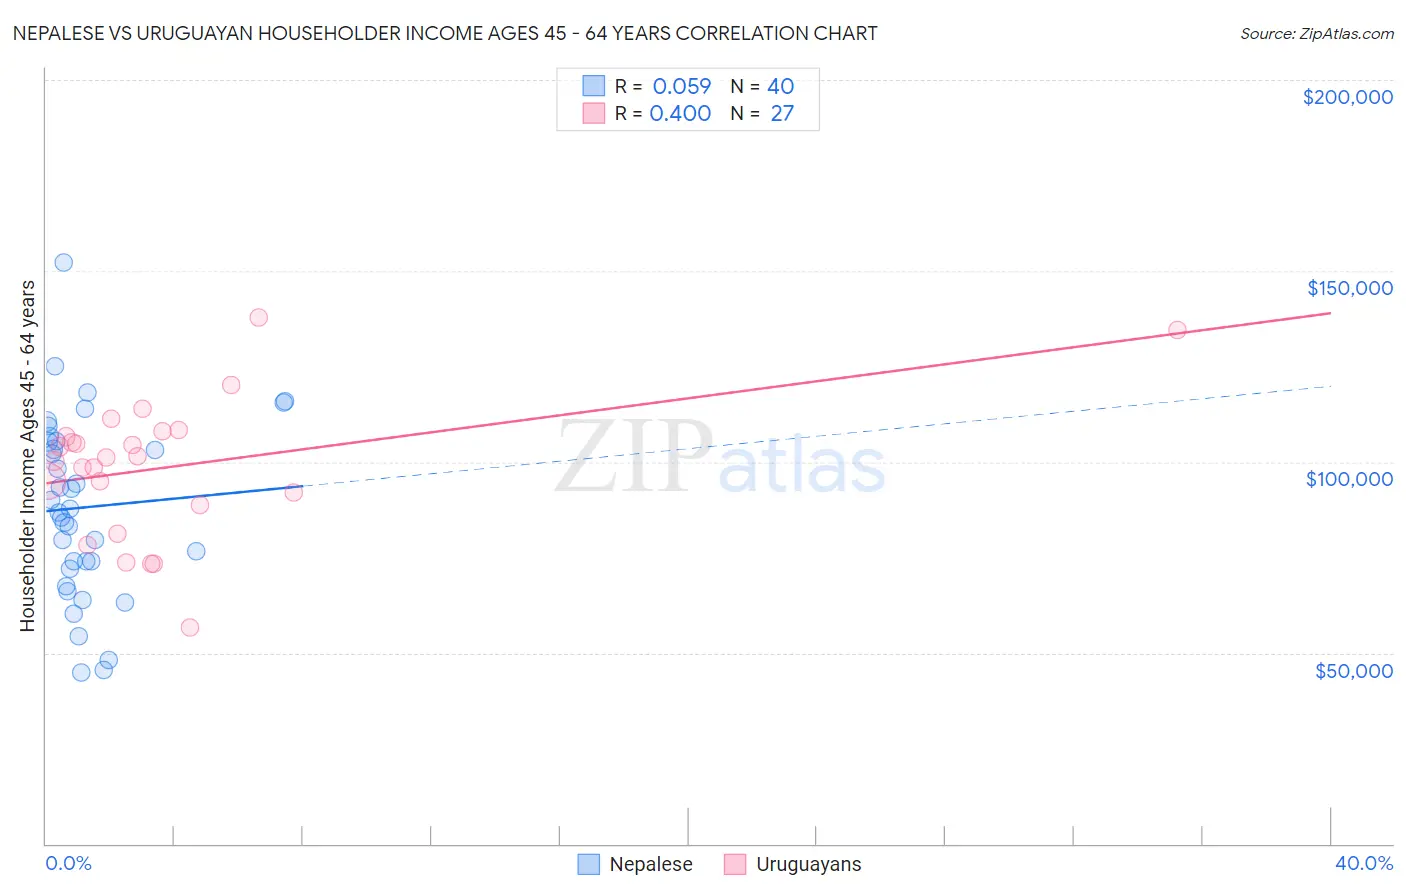 Nepalese vs Uruguayan Householder Income Ages 45 - 64 years